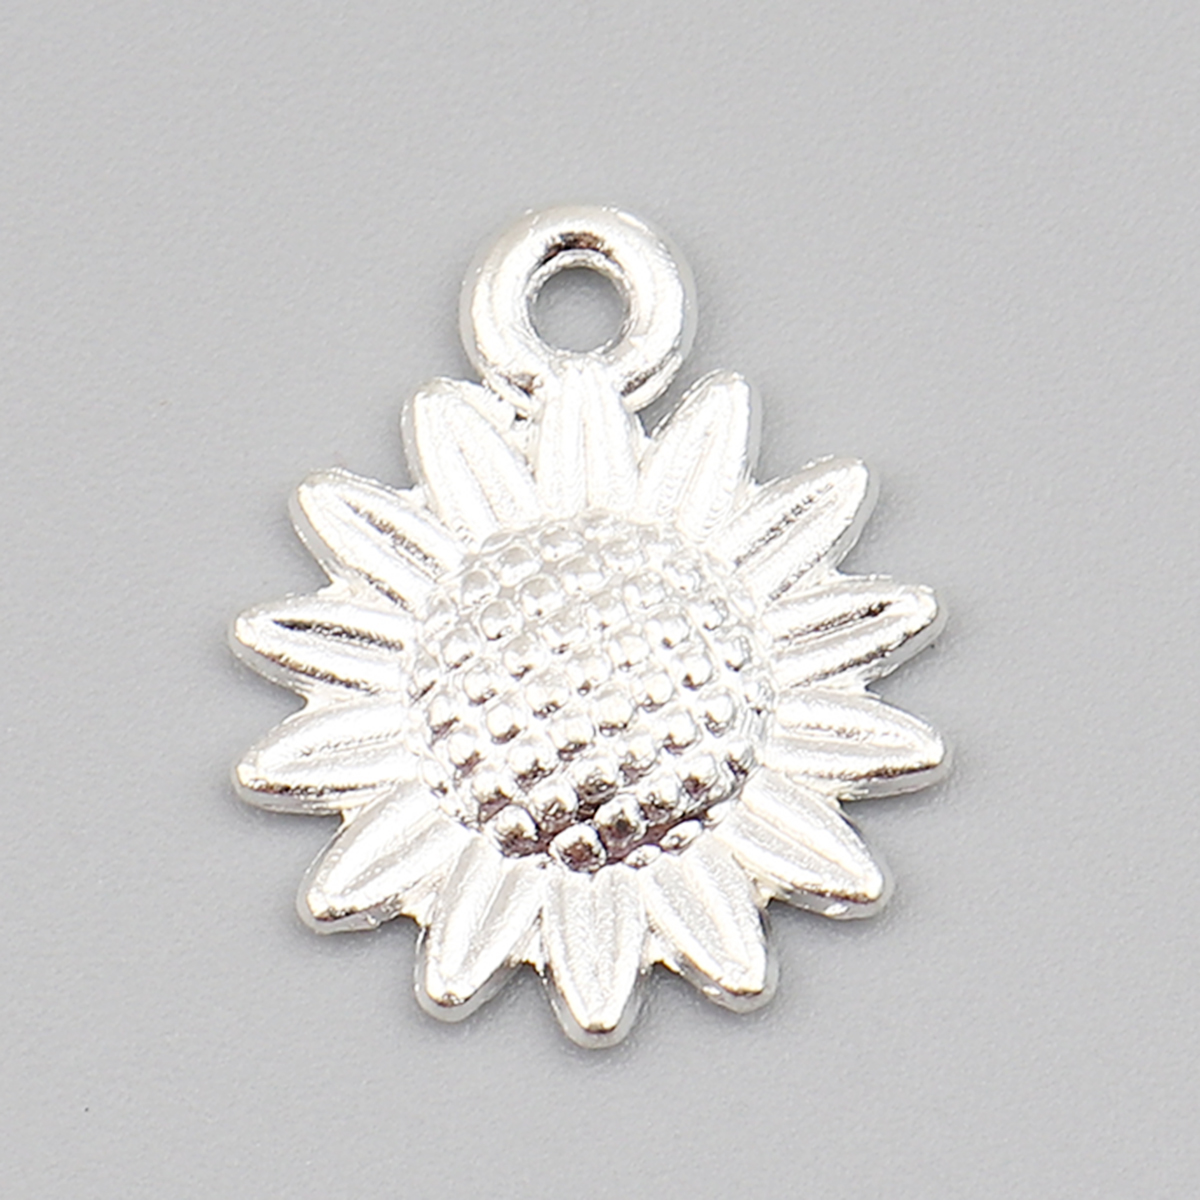 Picture of Zinc Based Alloy Charms Sunflower Silver Plated 18mm x 15mm, 50 PCs